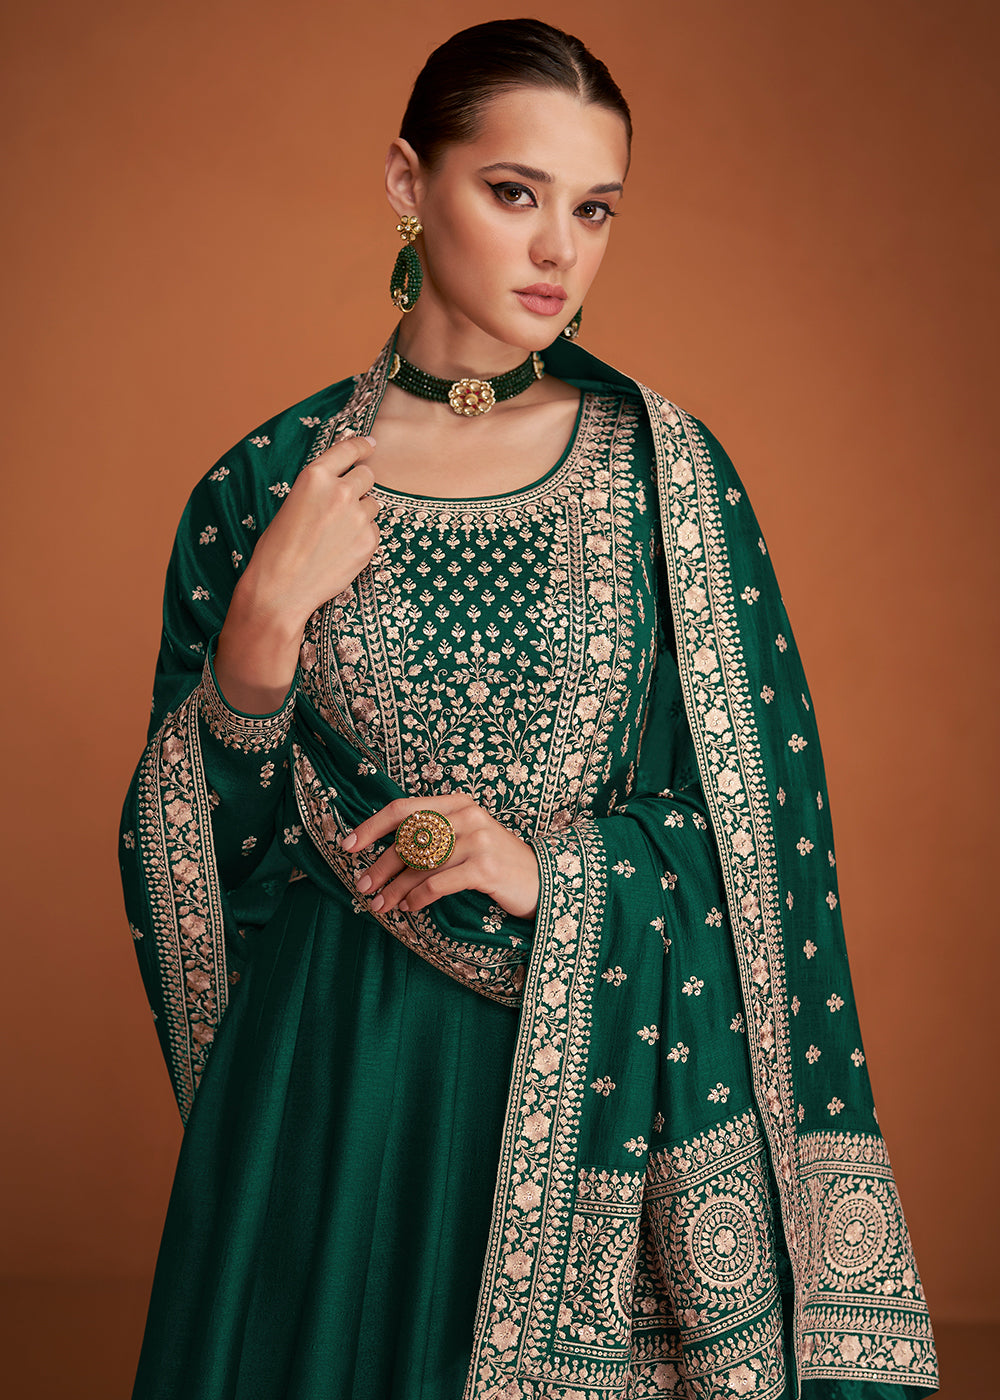 Buy Now Glamourous Bottle Green Silk Embroidered Party Wear Anarkali Online in USA, UK, Australia, New Zealand, Canada, Italy & Worldwide at Empress Clothing.